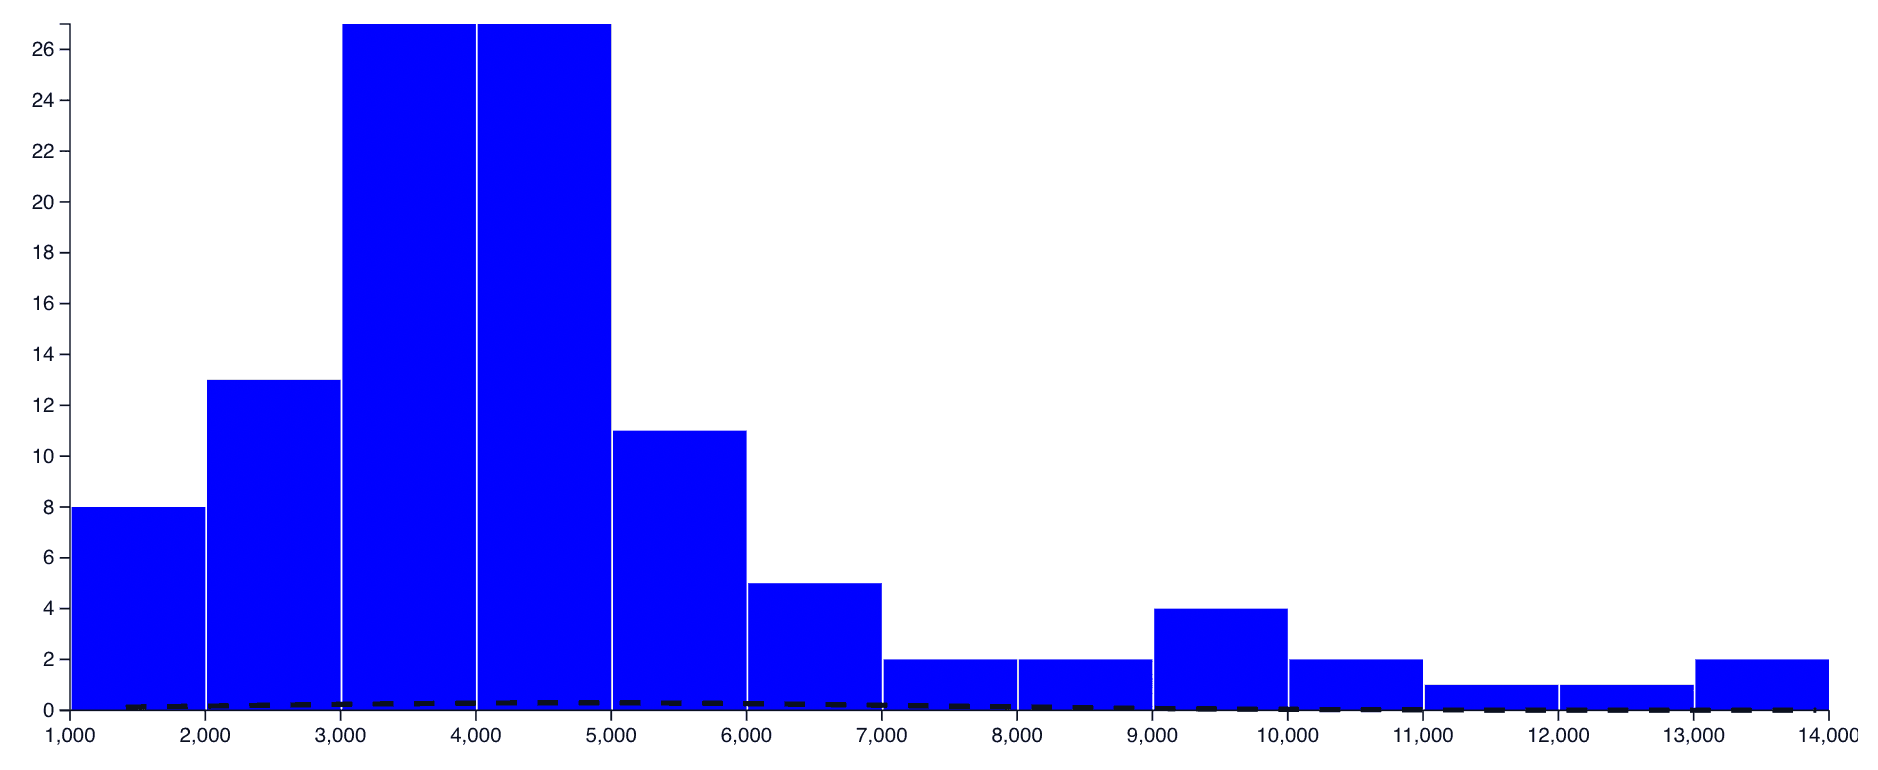 Histogram chart showing the distribution of a time series' data points